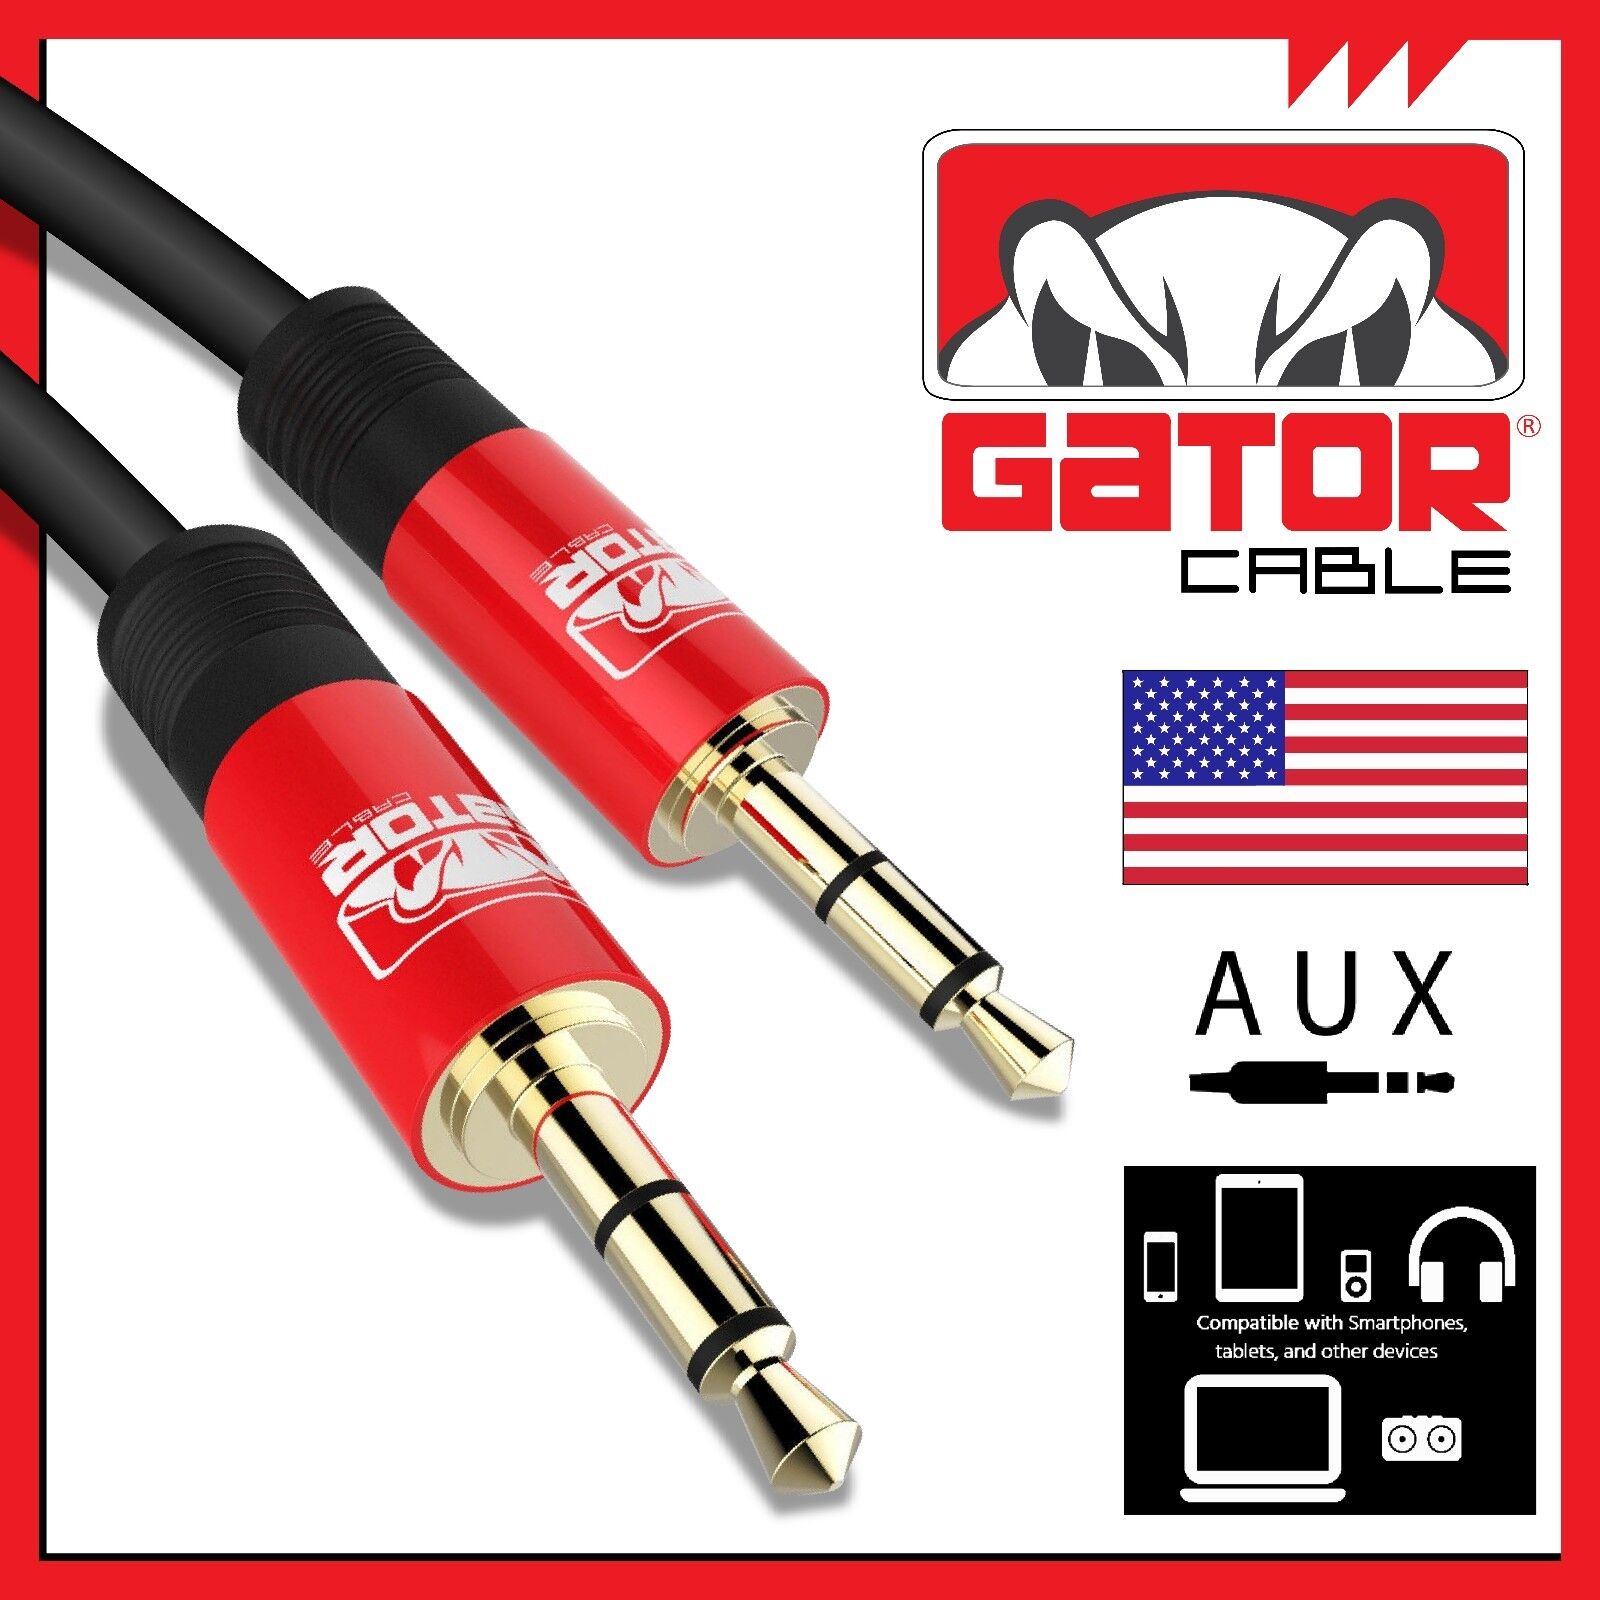 AUX 3.5mm Audio Cable Cord Male to Male For Phone iPhone Samsung LG Earphones Gator Cable AUX-3.5mm-Male-to-Male - фотография #6